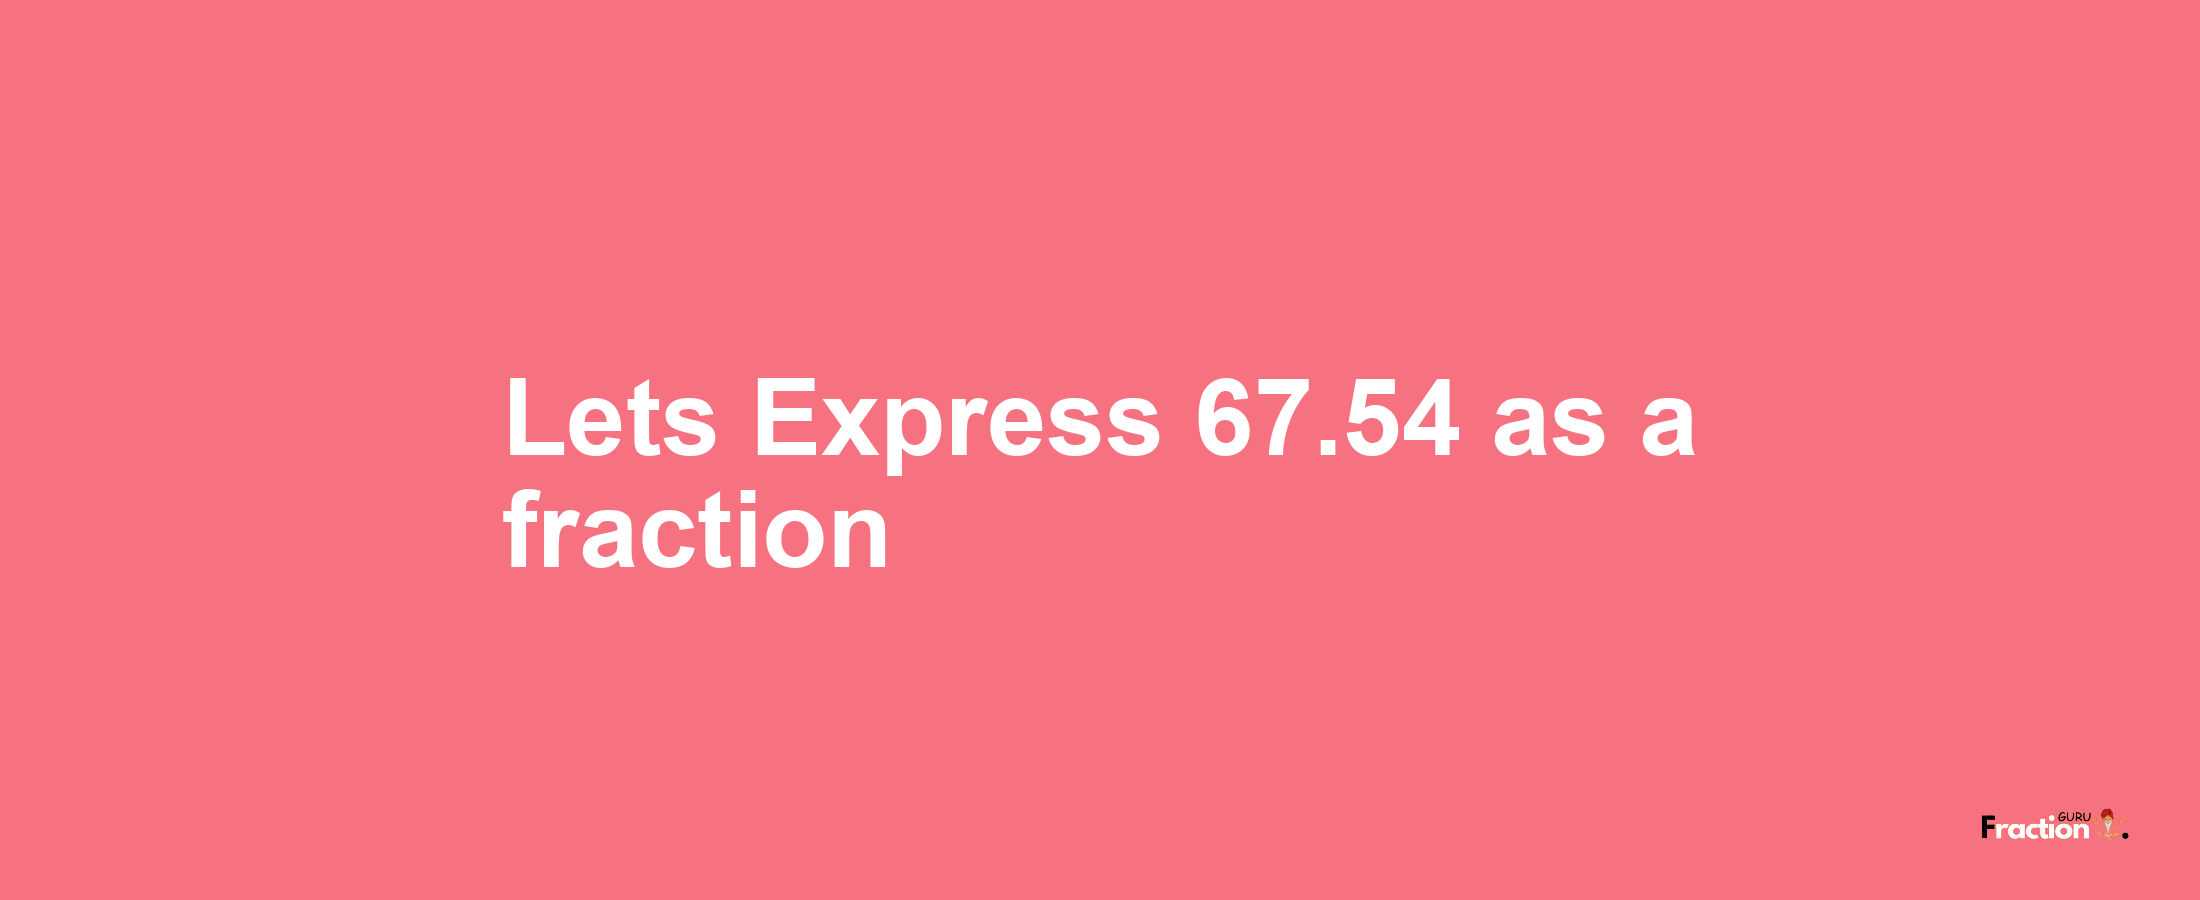 Lets Express 67.54 as afraction